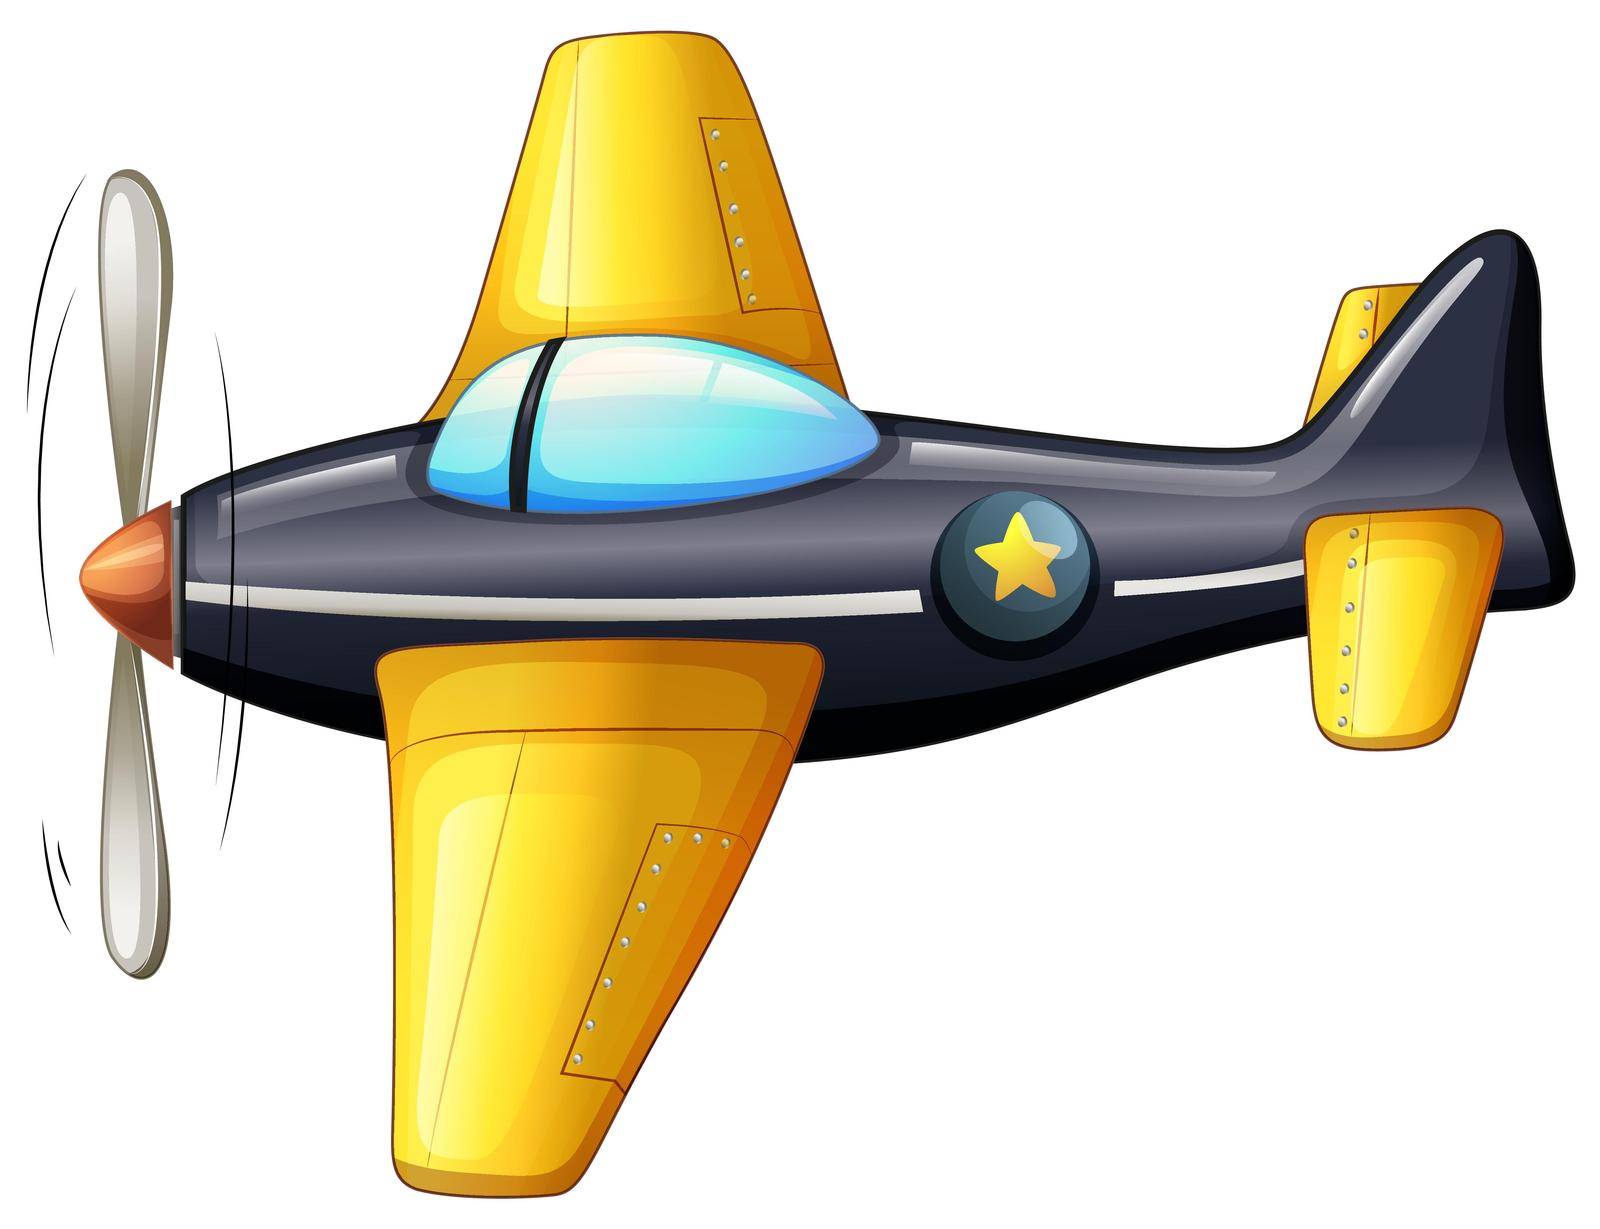 Illustration of a vintage aircraft on a white background